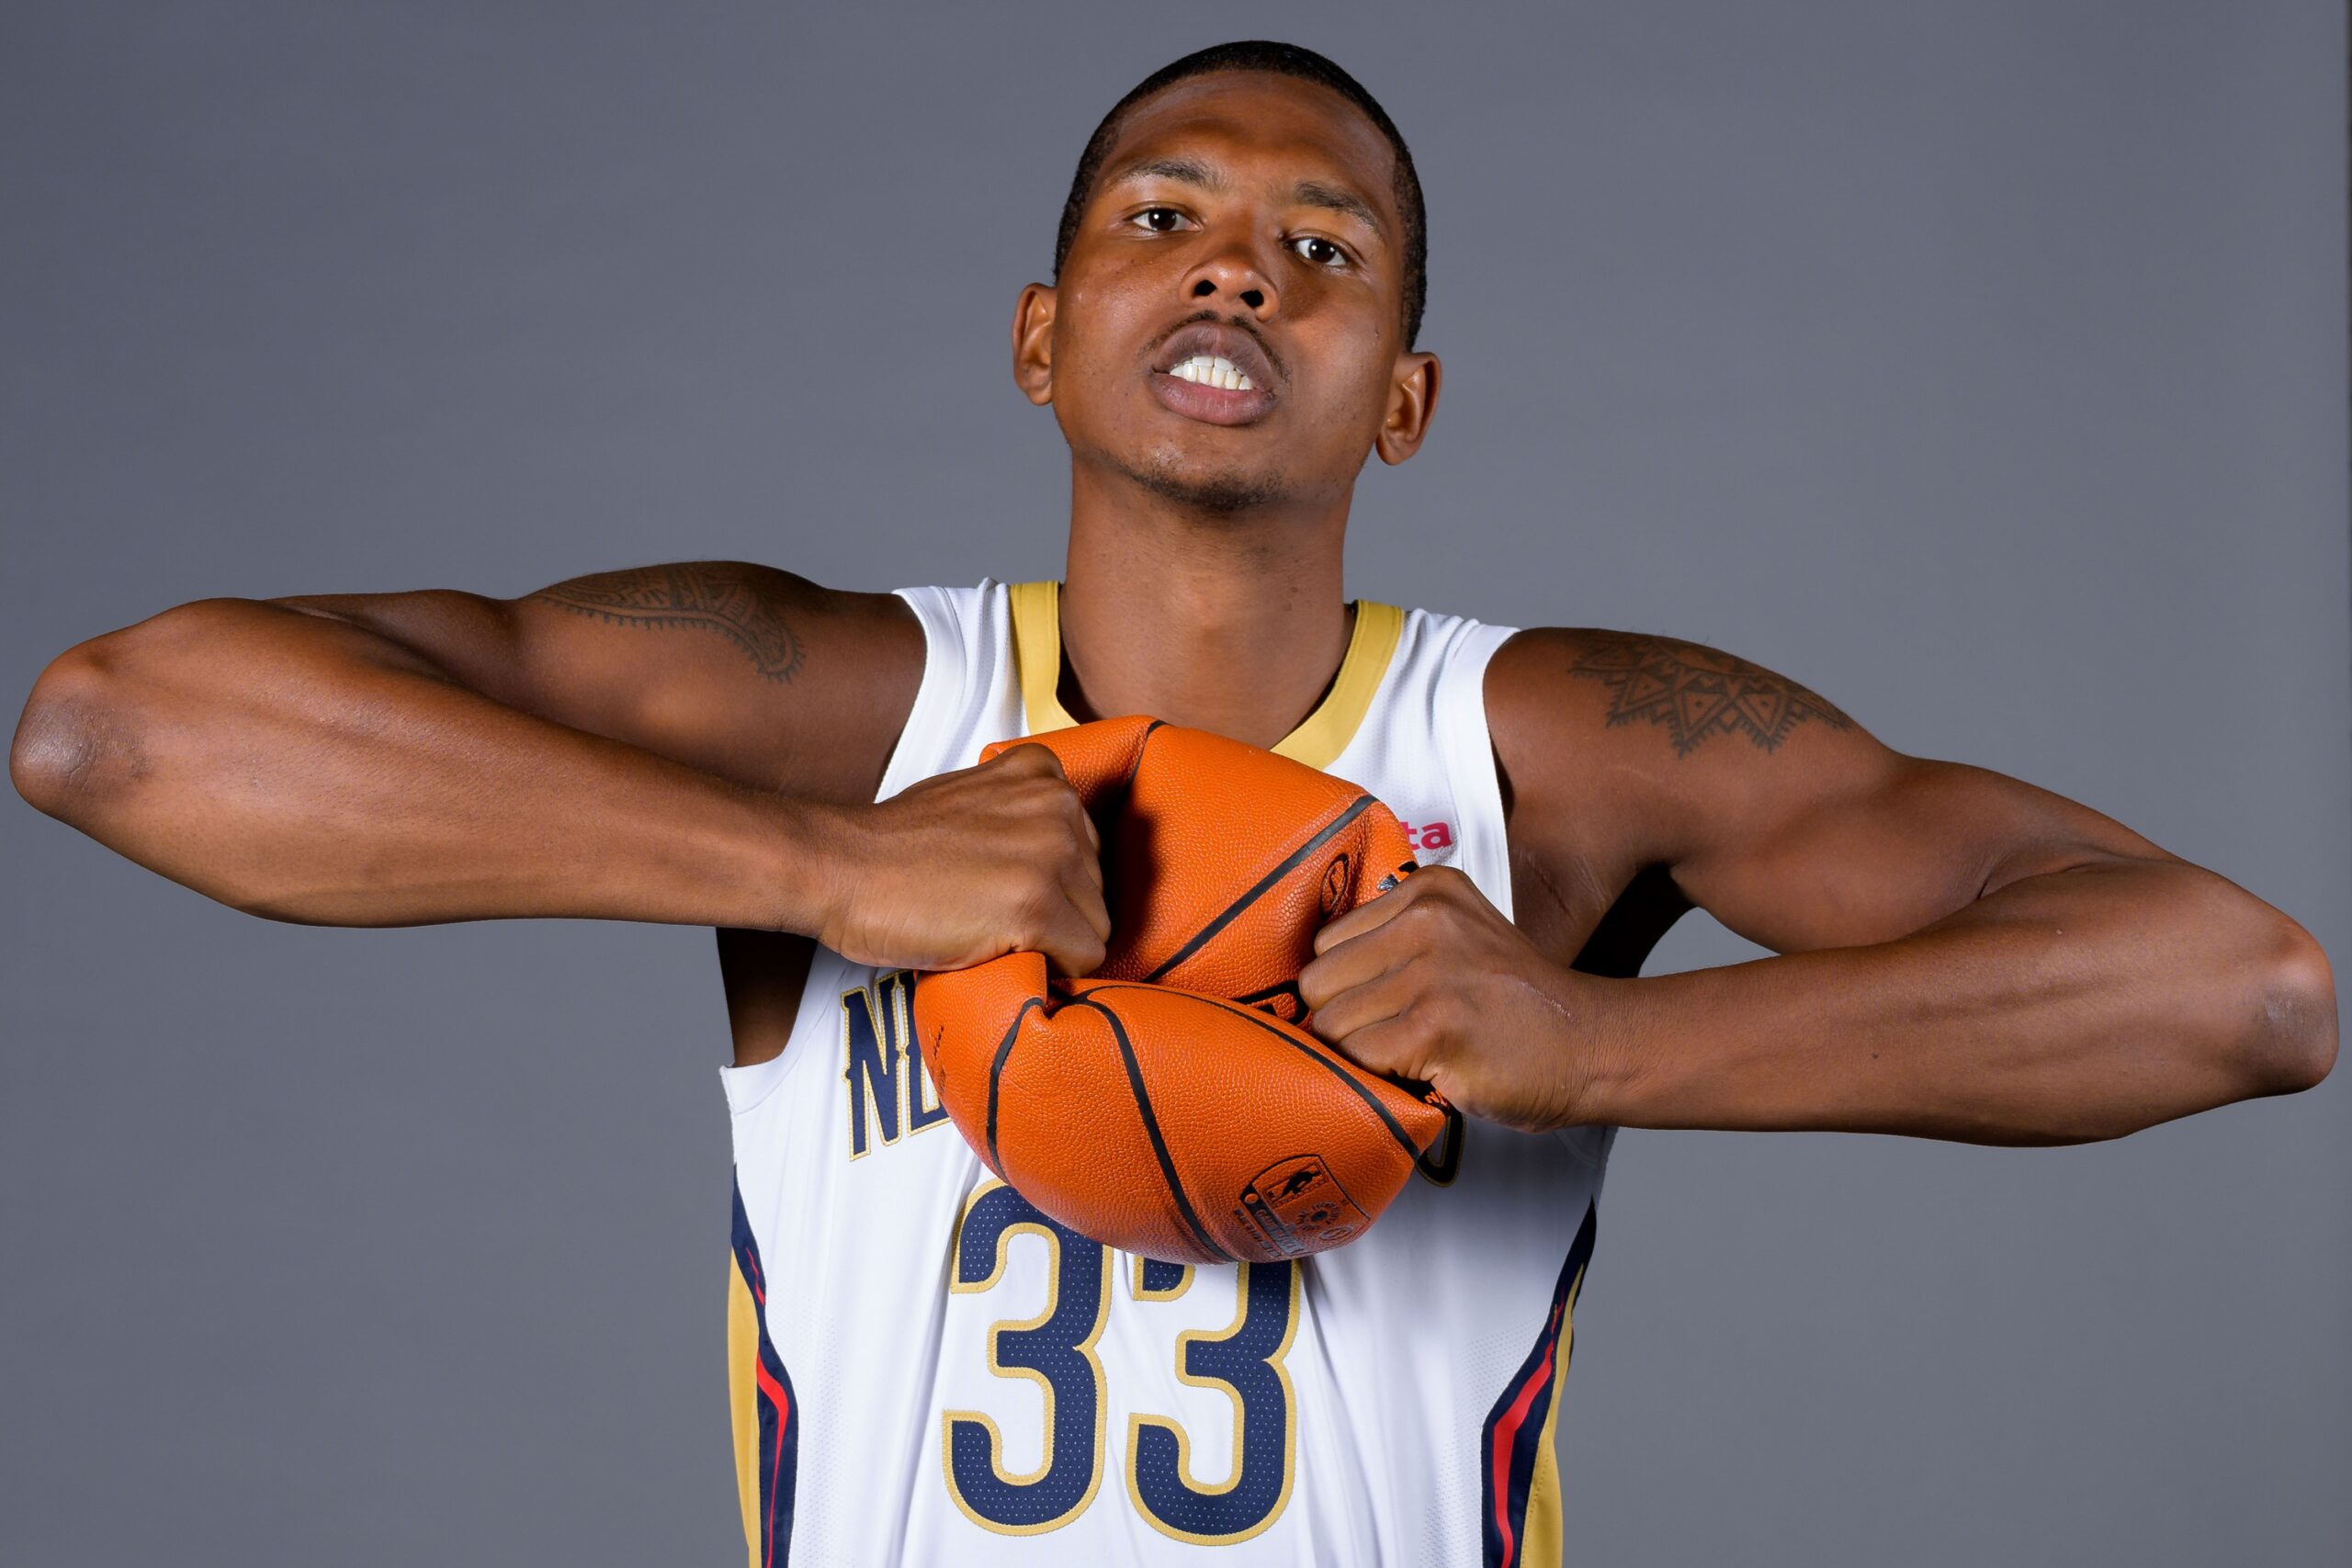 Oct 2, 2023; New Orleans, LA, USA; New Orleans Pelicans guard Malcolm Hill (33) poses during Media Day at the Smoothie King Center. Mandatory Credit: Matthew Hinton-USA TODAY Sports